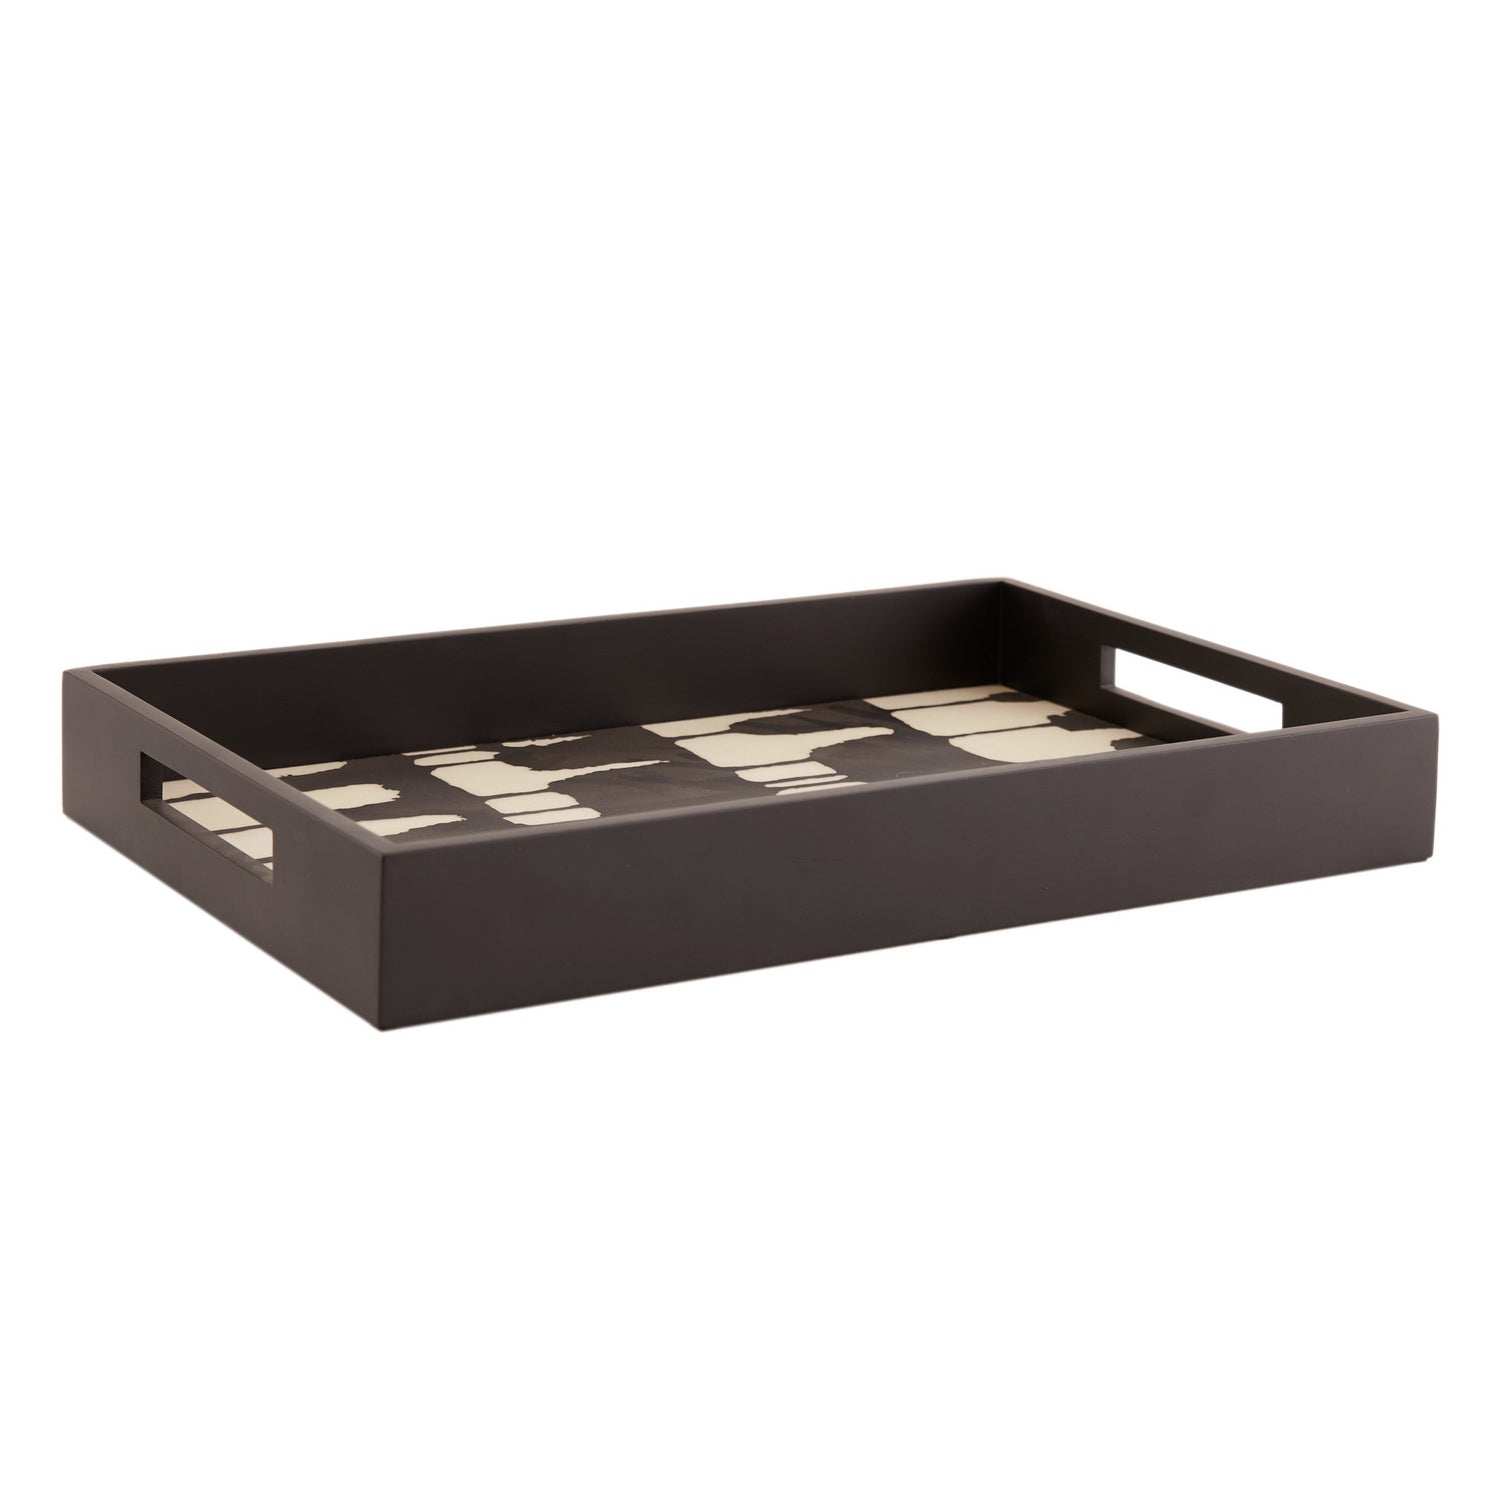 Tray from the Peregrine collection in Black & White finish